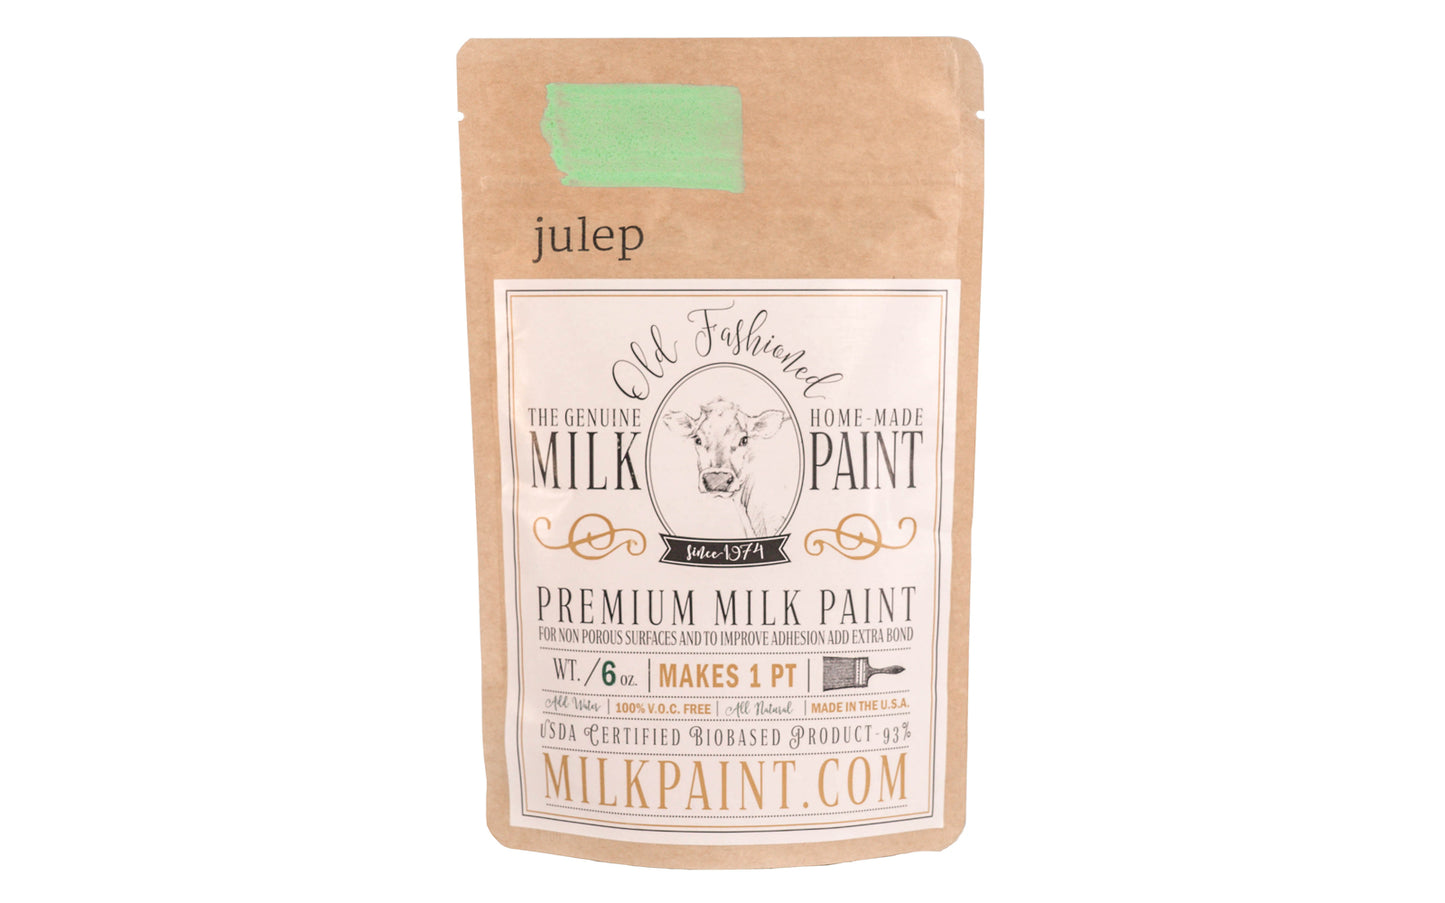 This Milk Paint color is "Julep" - Bright light green. Comes in a powder form, you can control how thick/thin you mix the paint. Use it as you would regular paint, thinner for a wash/stain or thicker to create texture. Environmentally safe, non-toxic & is food safe. 100% VOC free. Powder Paint